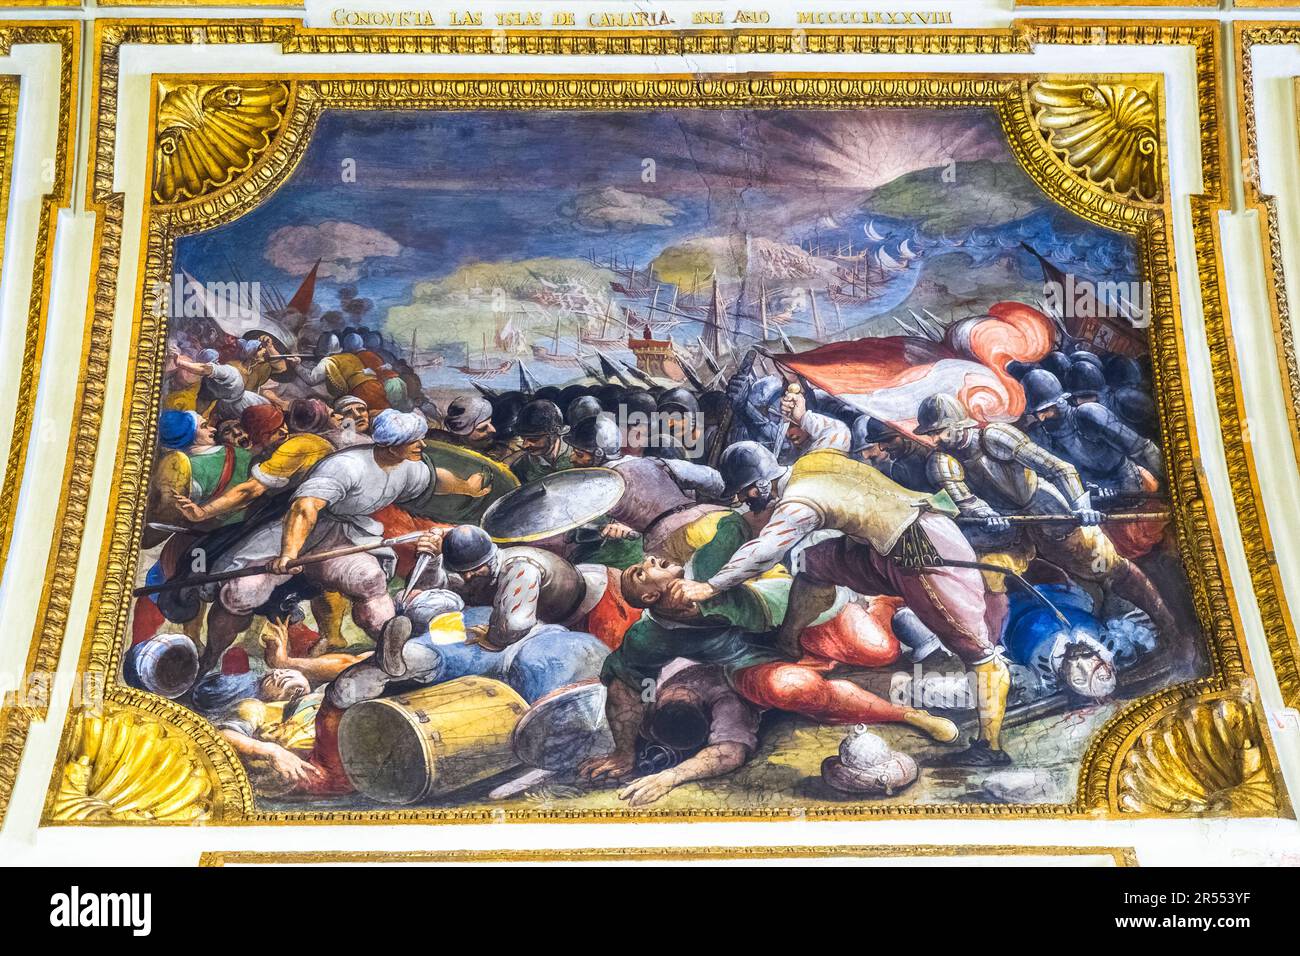 Painted ceiling framed by gilded stucco mouldings and inscriptions depicting the conquest of the Canary Island by Ferrante of Aragon - The ambassador's Hall in the Royal Palace of Naples that In 1734 became the royal residence of the Bourbons - Naples, Italy Stock Photo